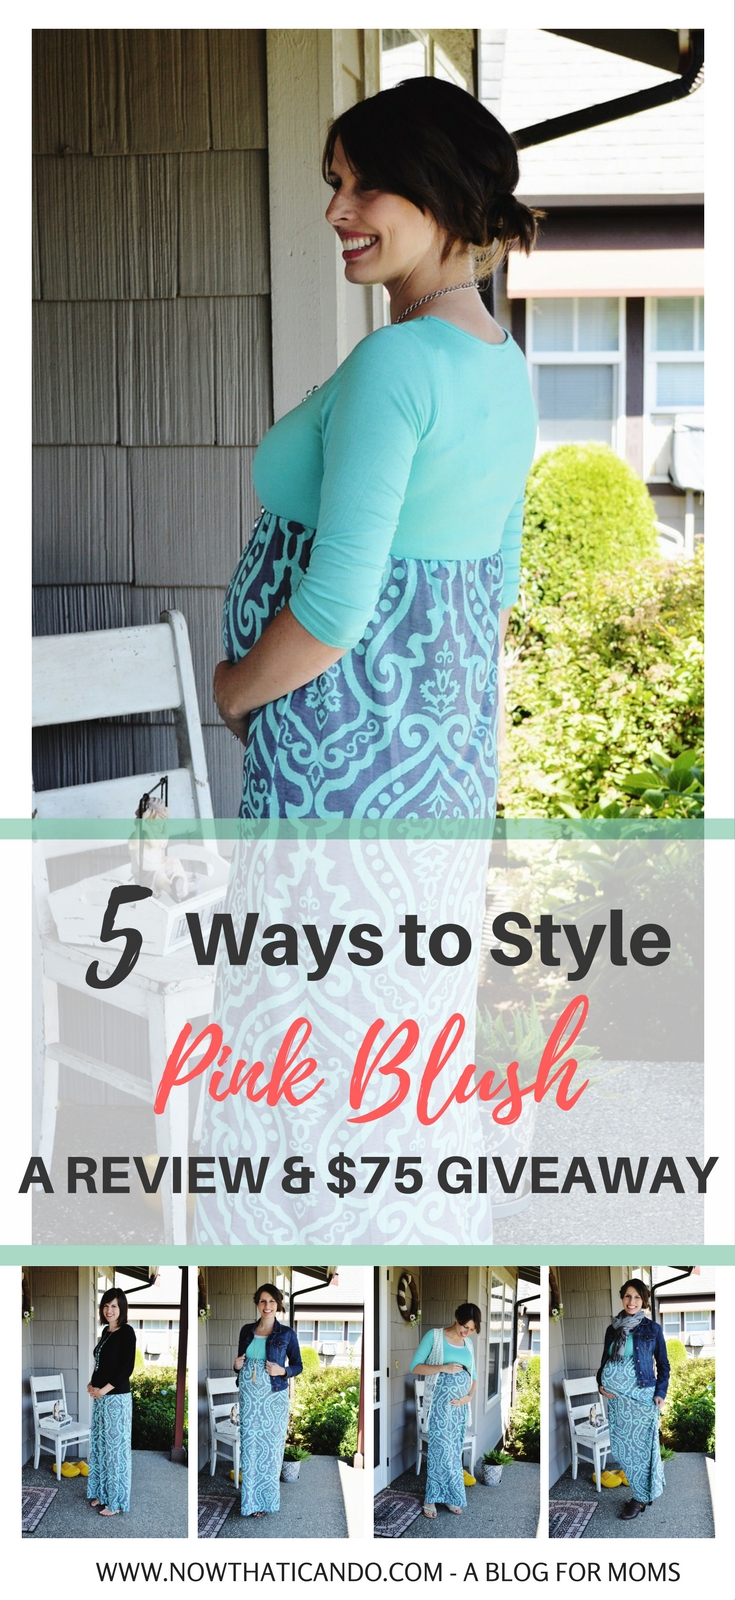 5 ways to style one maternity maxi dress and shows how it looks prior to pregnancy and during the second and third trimesters. // Ways to wear spring & summer maxi dress // Mom fashion // How to style maxi dress // Feminine maternity #outfitideas #fashion #maternity #pregnancy